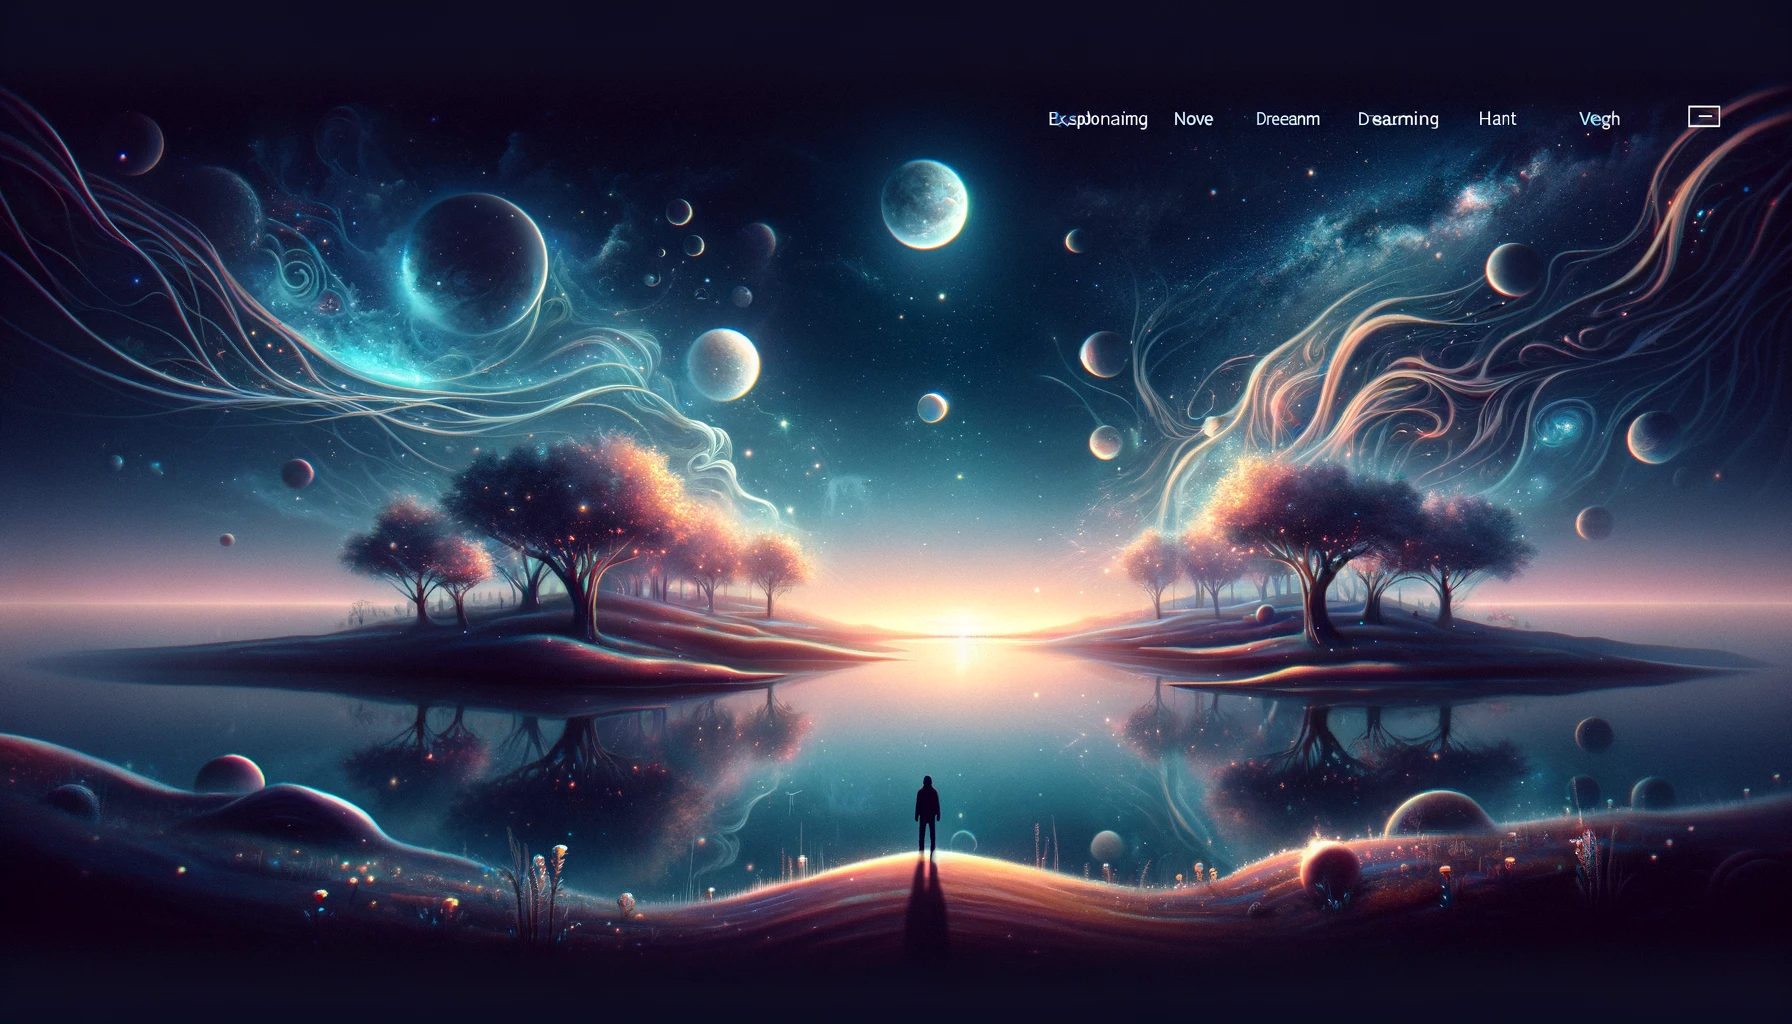 ·E 2023 11 19 03.39.01   A dreamlike, surreal landscape for a blog header image. The landscape features a blend of natural and fantastical elements, with a clear night sky fil.png